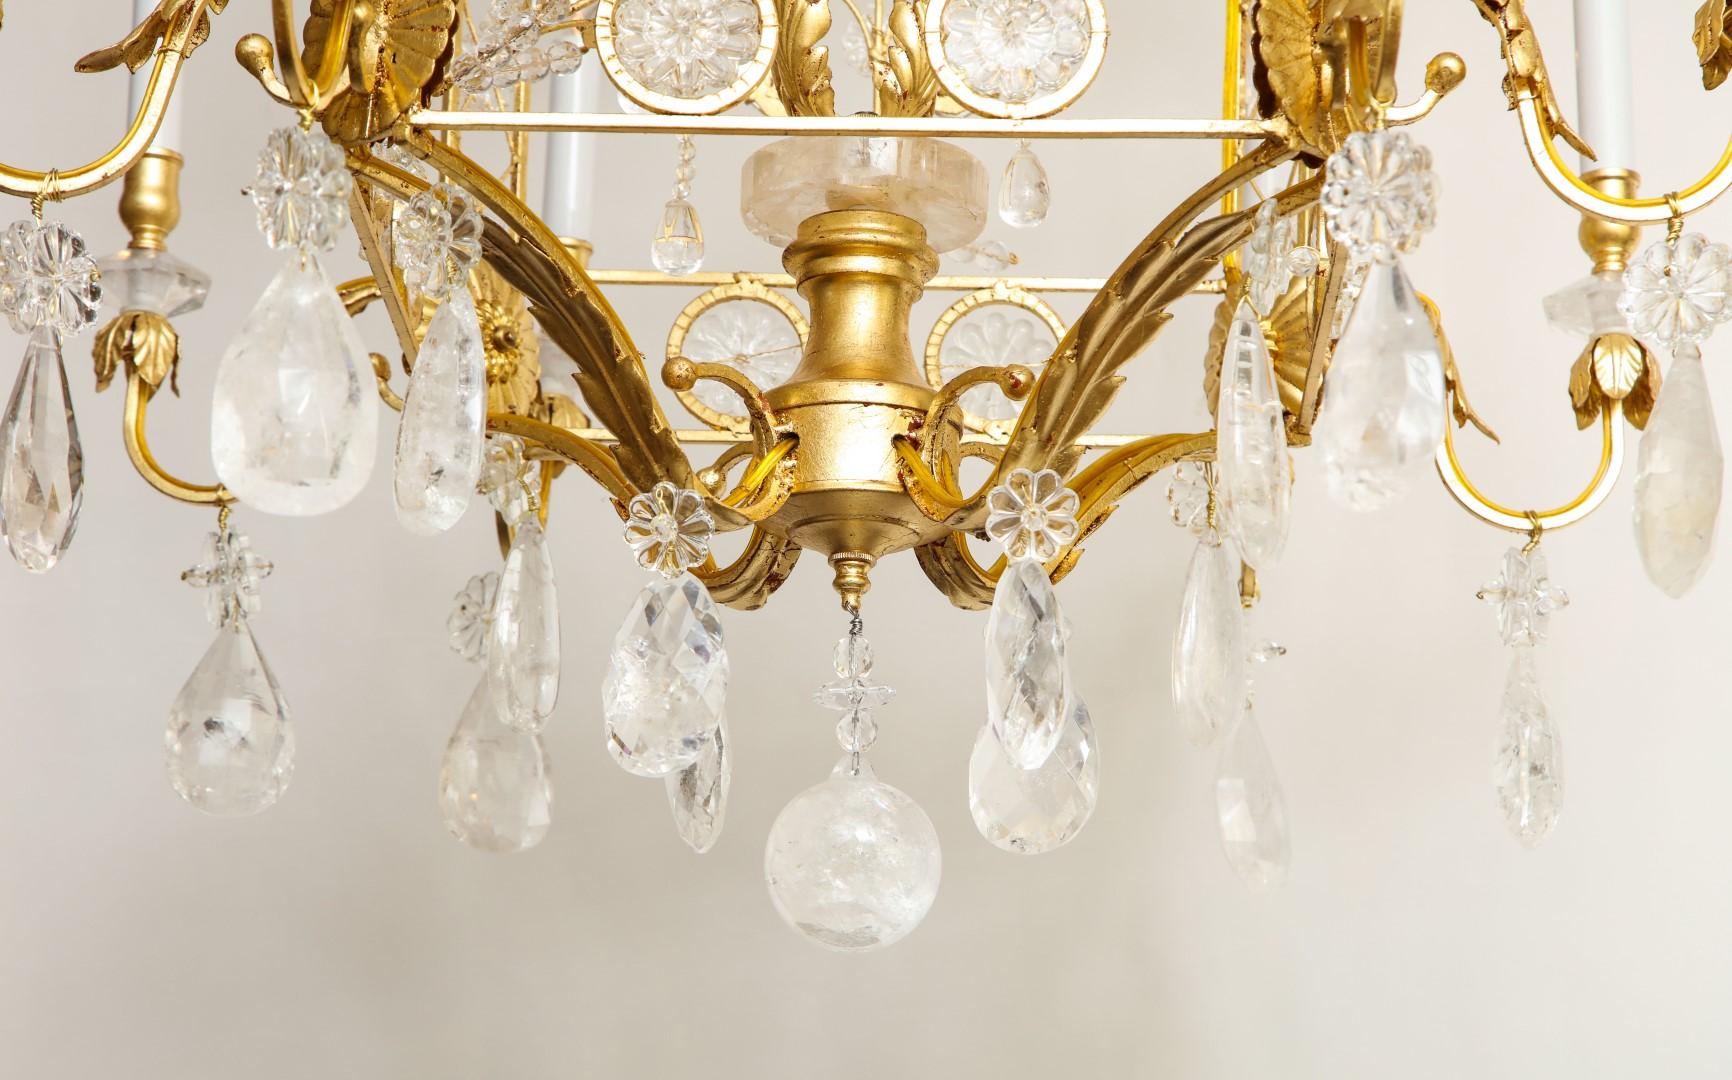 Contemporary Louis XVI Style Rock Crystal Chandelier, Gold Gilt Metal Finish, New